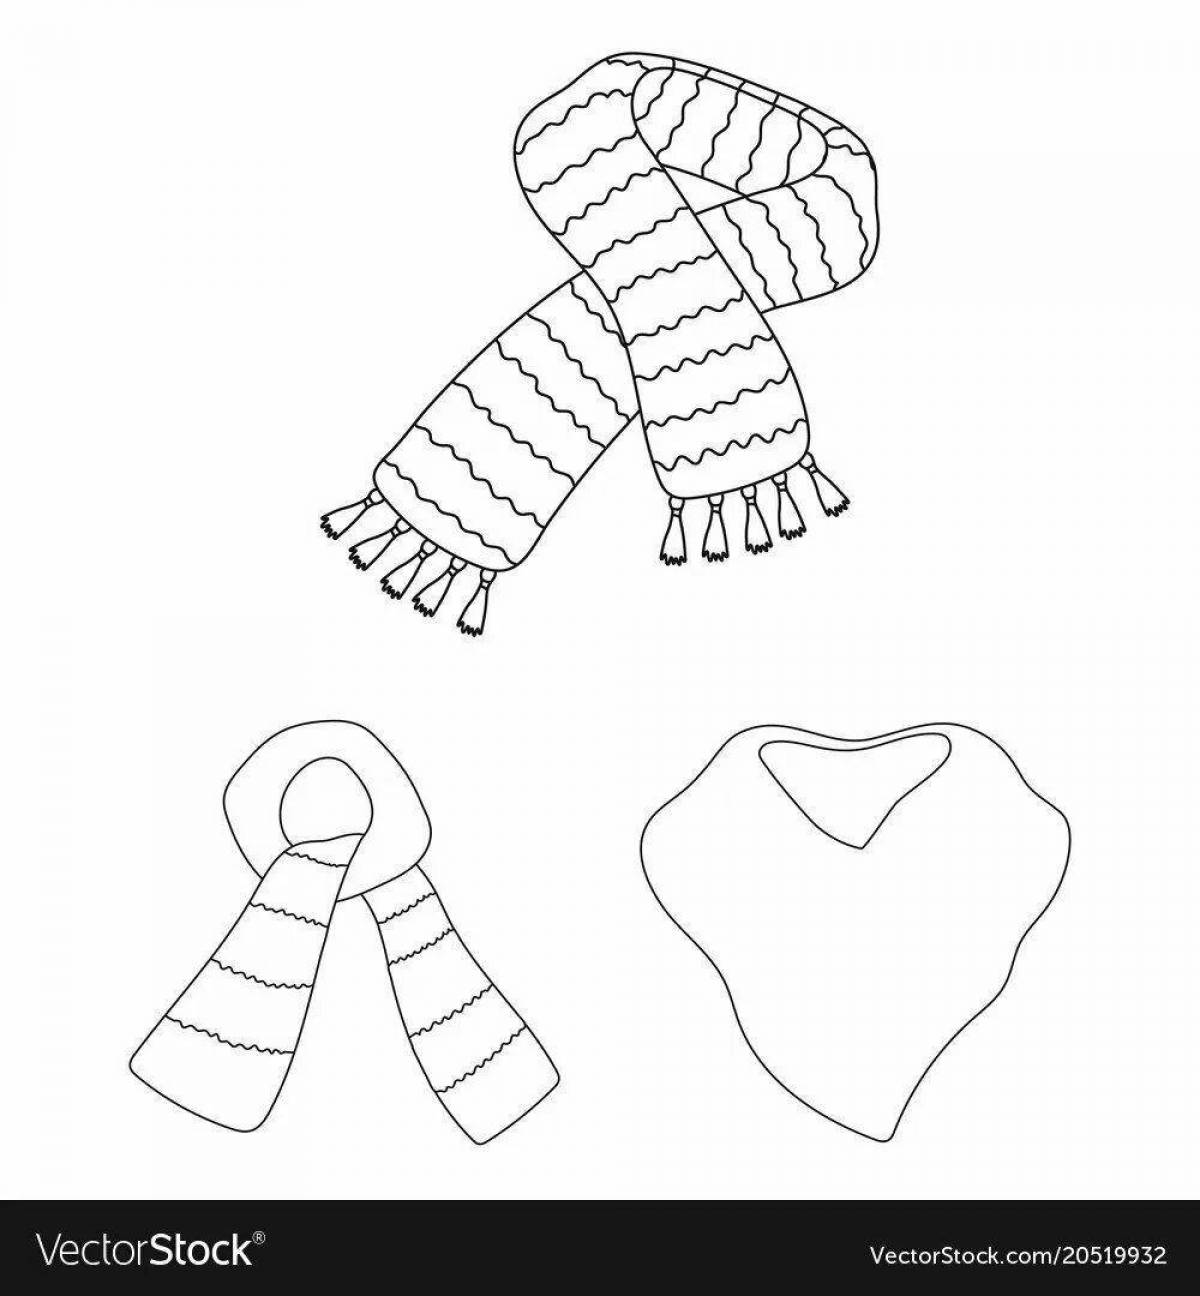 Adorable scarf coloring book for 3-4 year olds